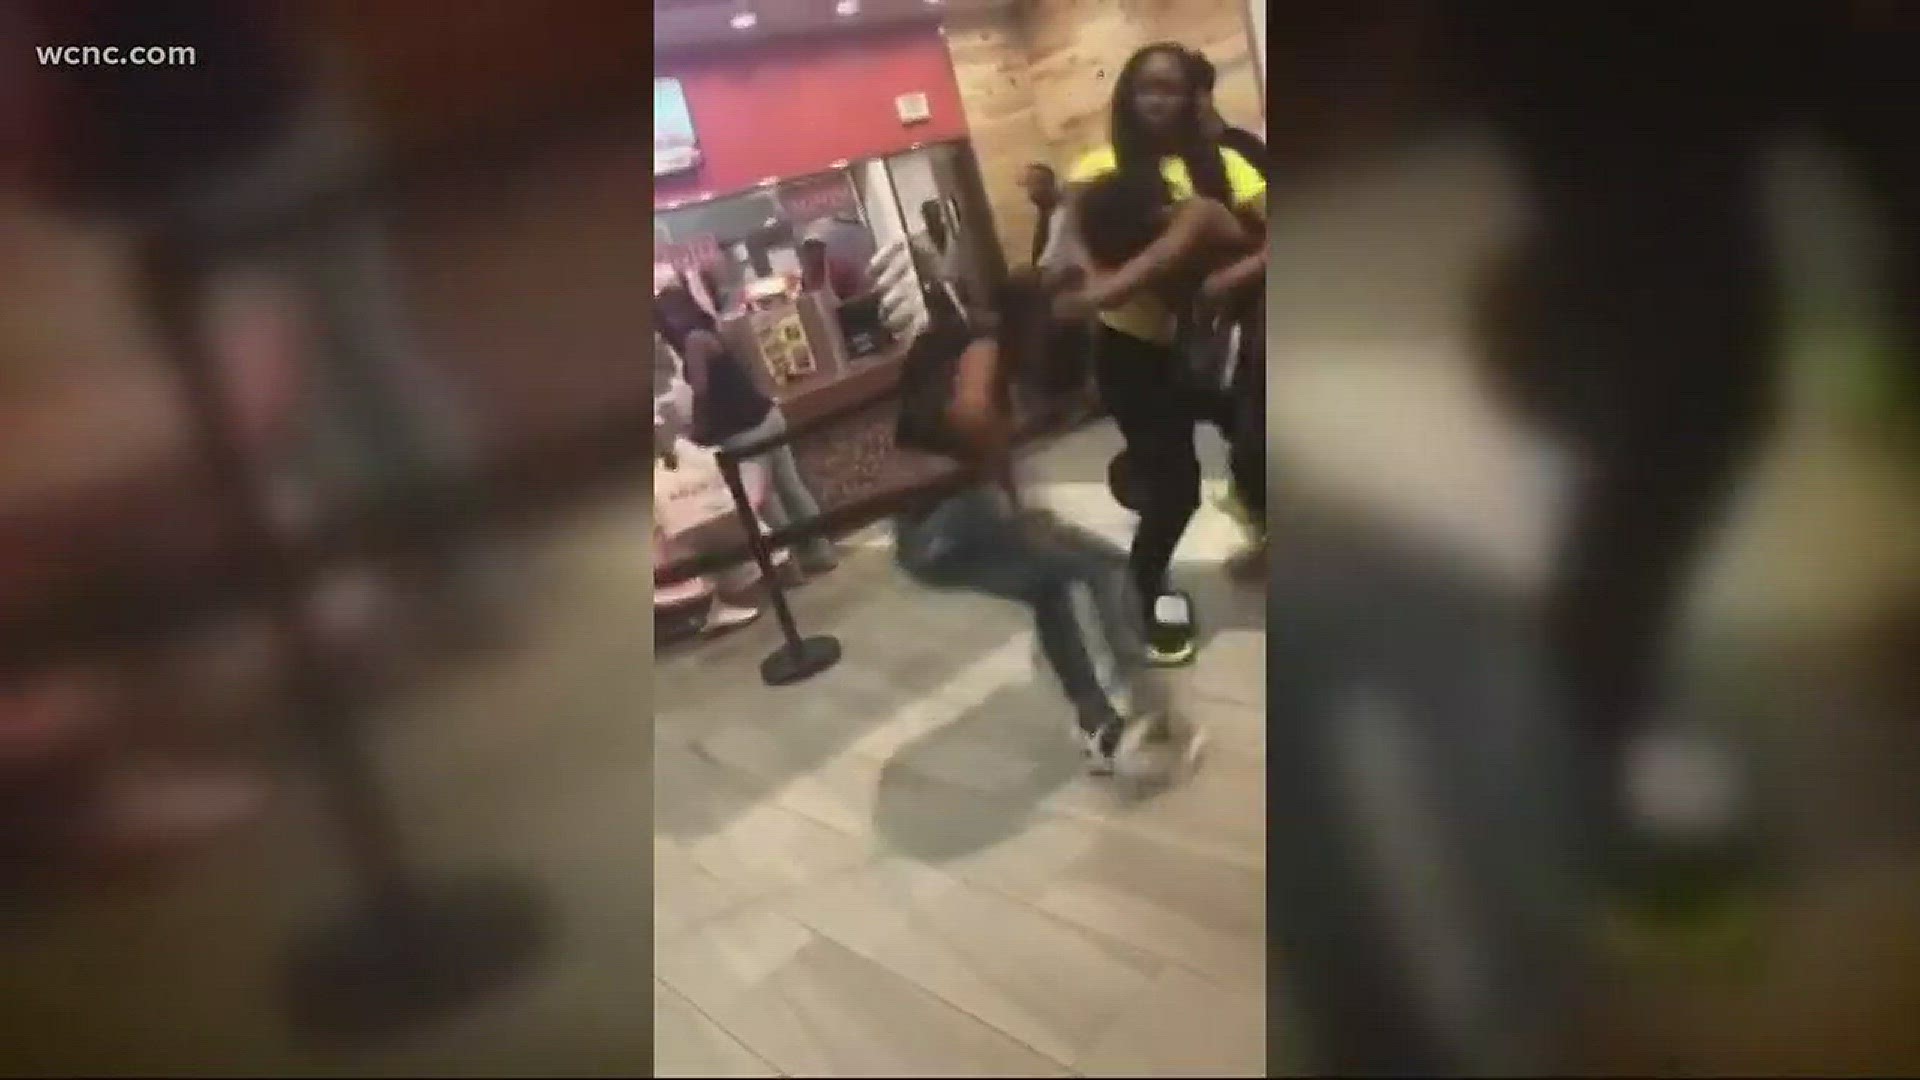 A pair of violent incidents at local malls are putting local shoppers on edge.